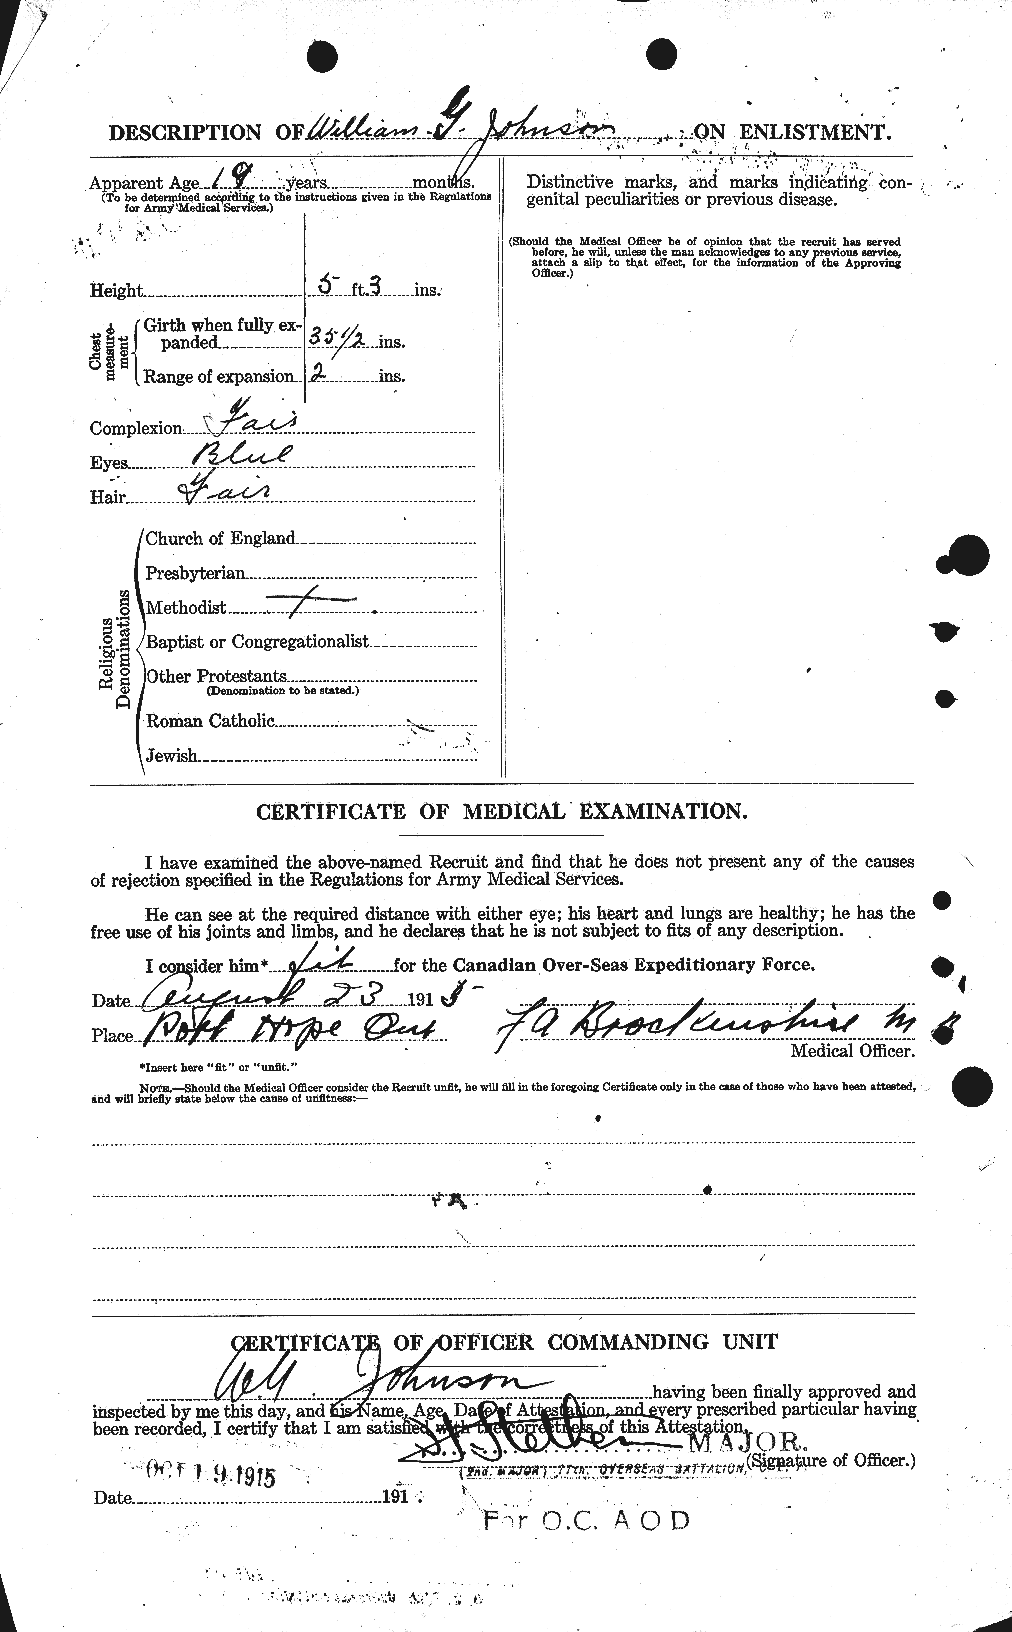 Personnel Records of the First World War - CEF 427326b